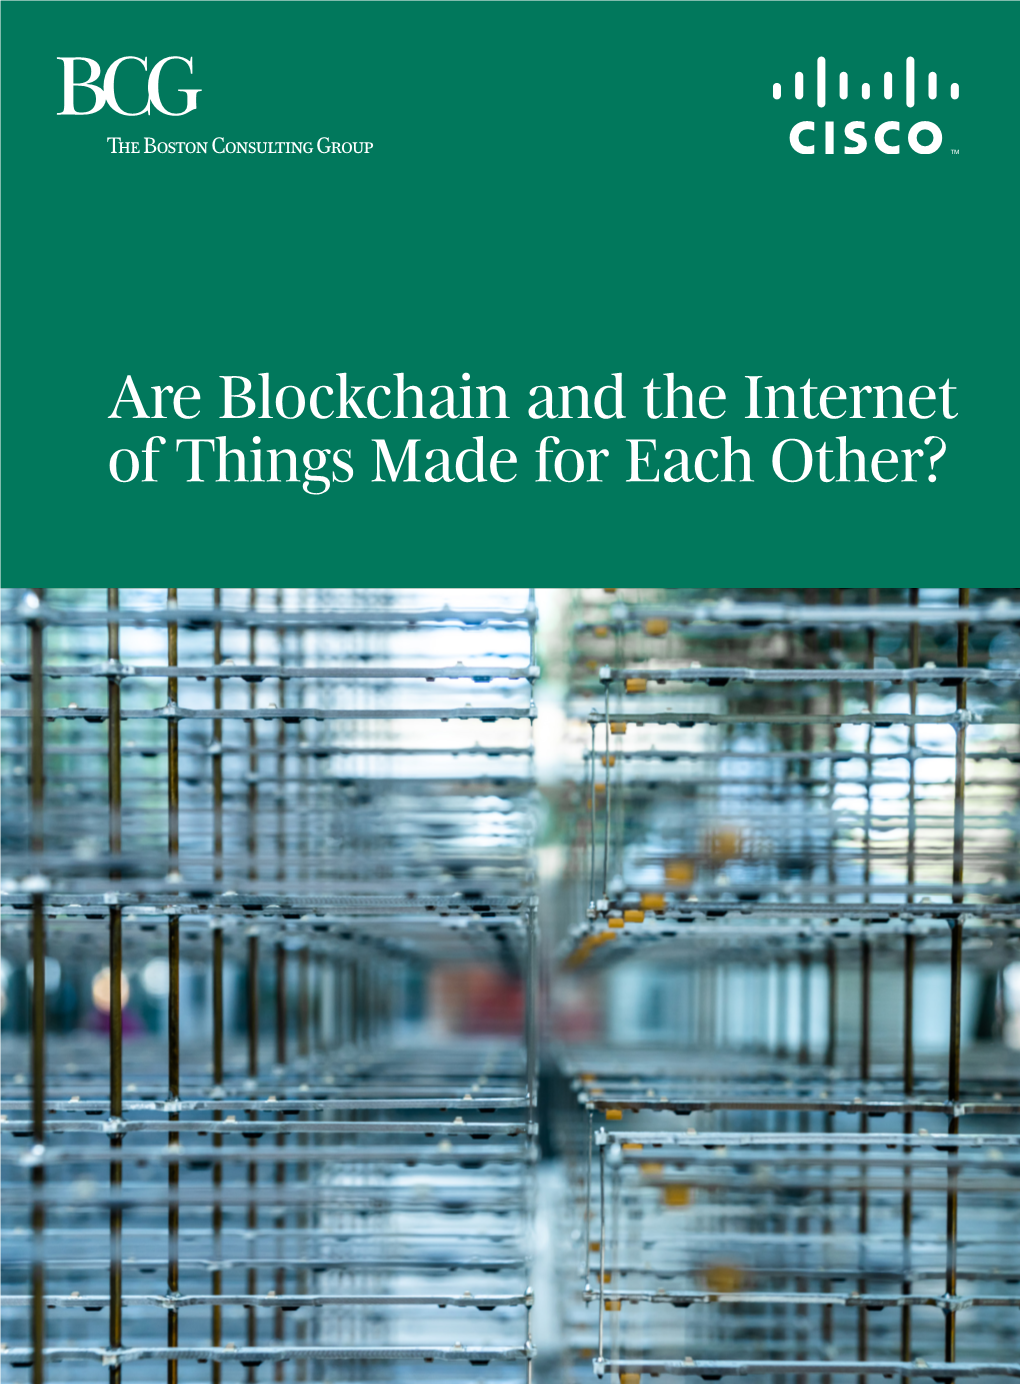 Are Blockchain and the Internet of Things Made for Each Other?